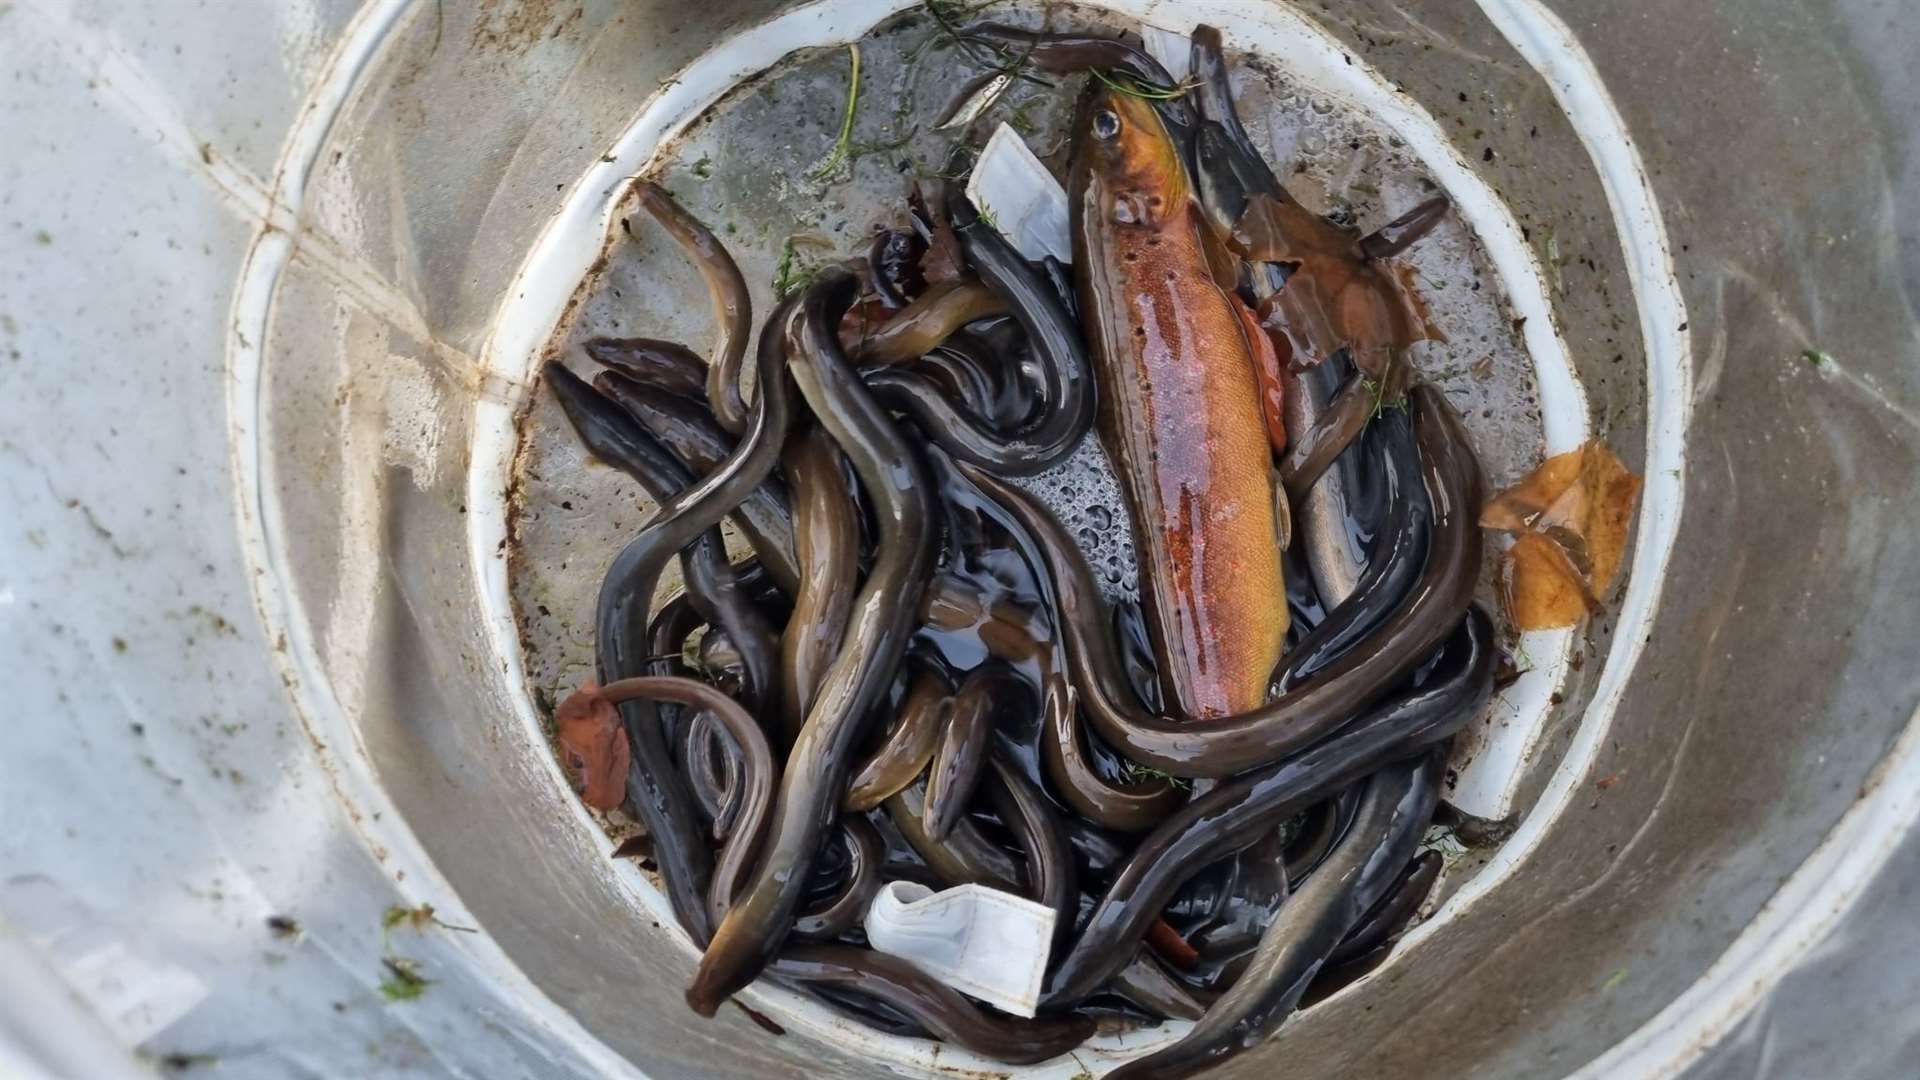 Eels and a brown trout.